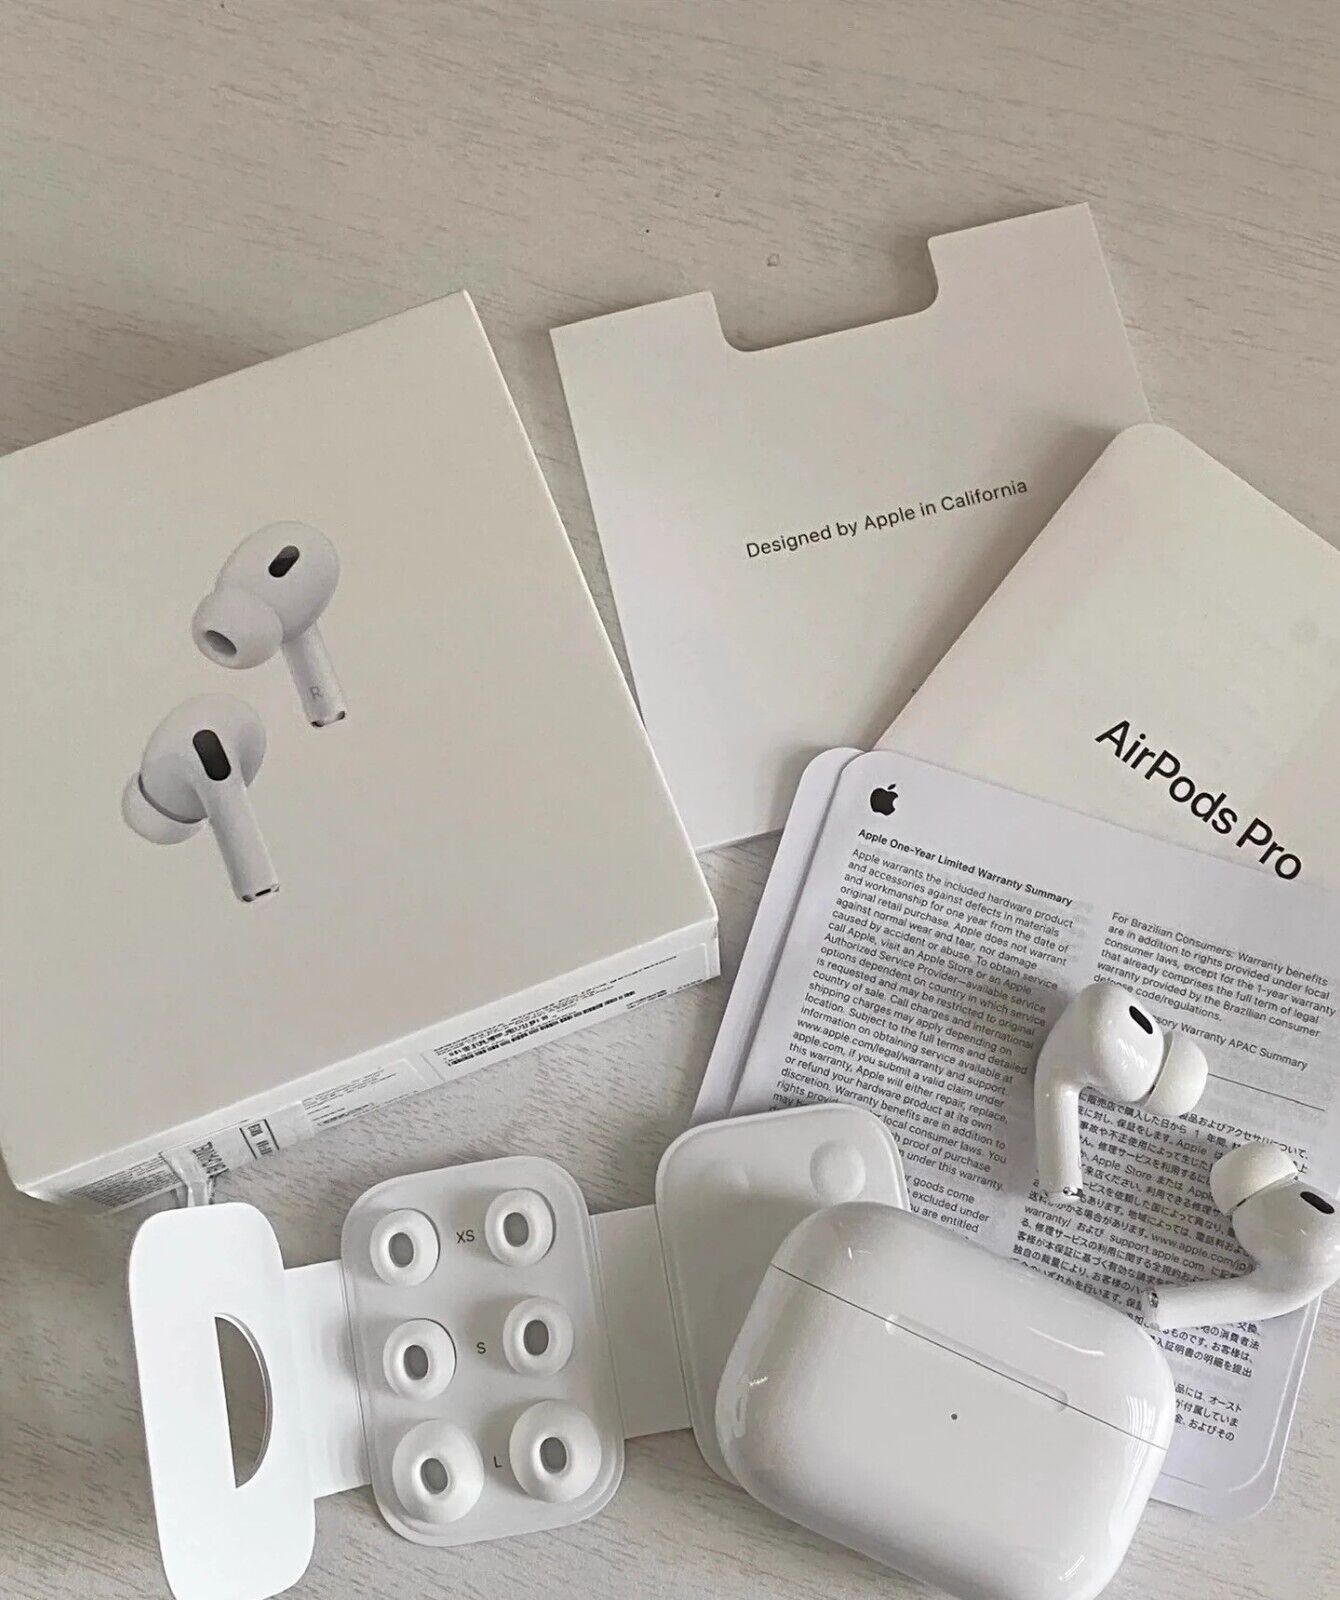 Apple AirPods Pro 2nd Generation Earbuds With MagSafe Charging Case